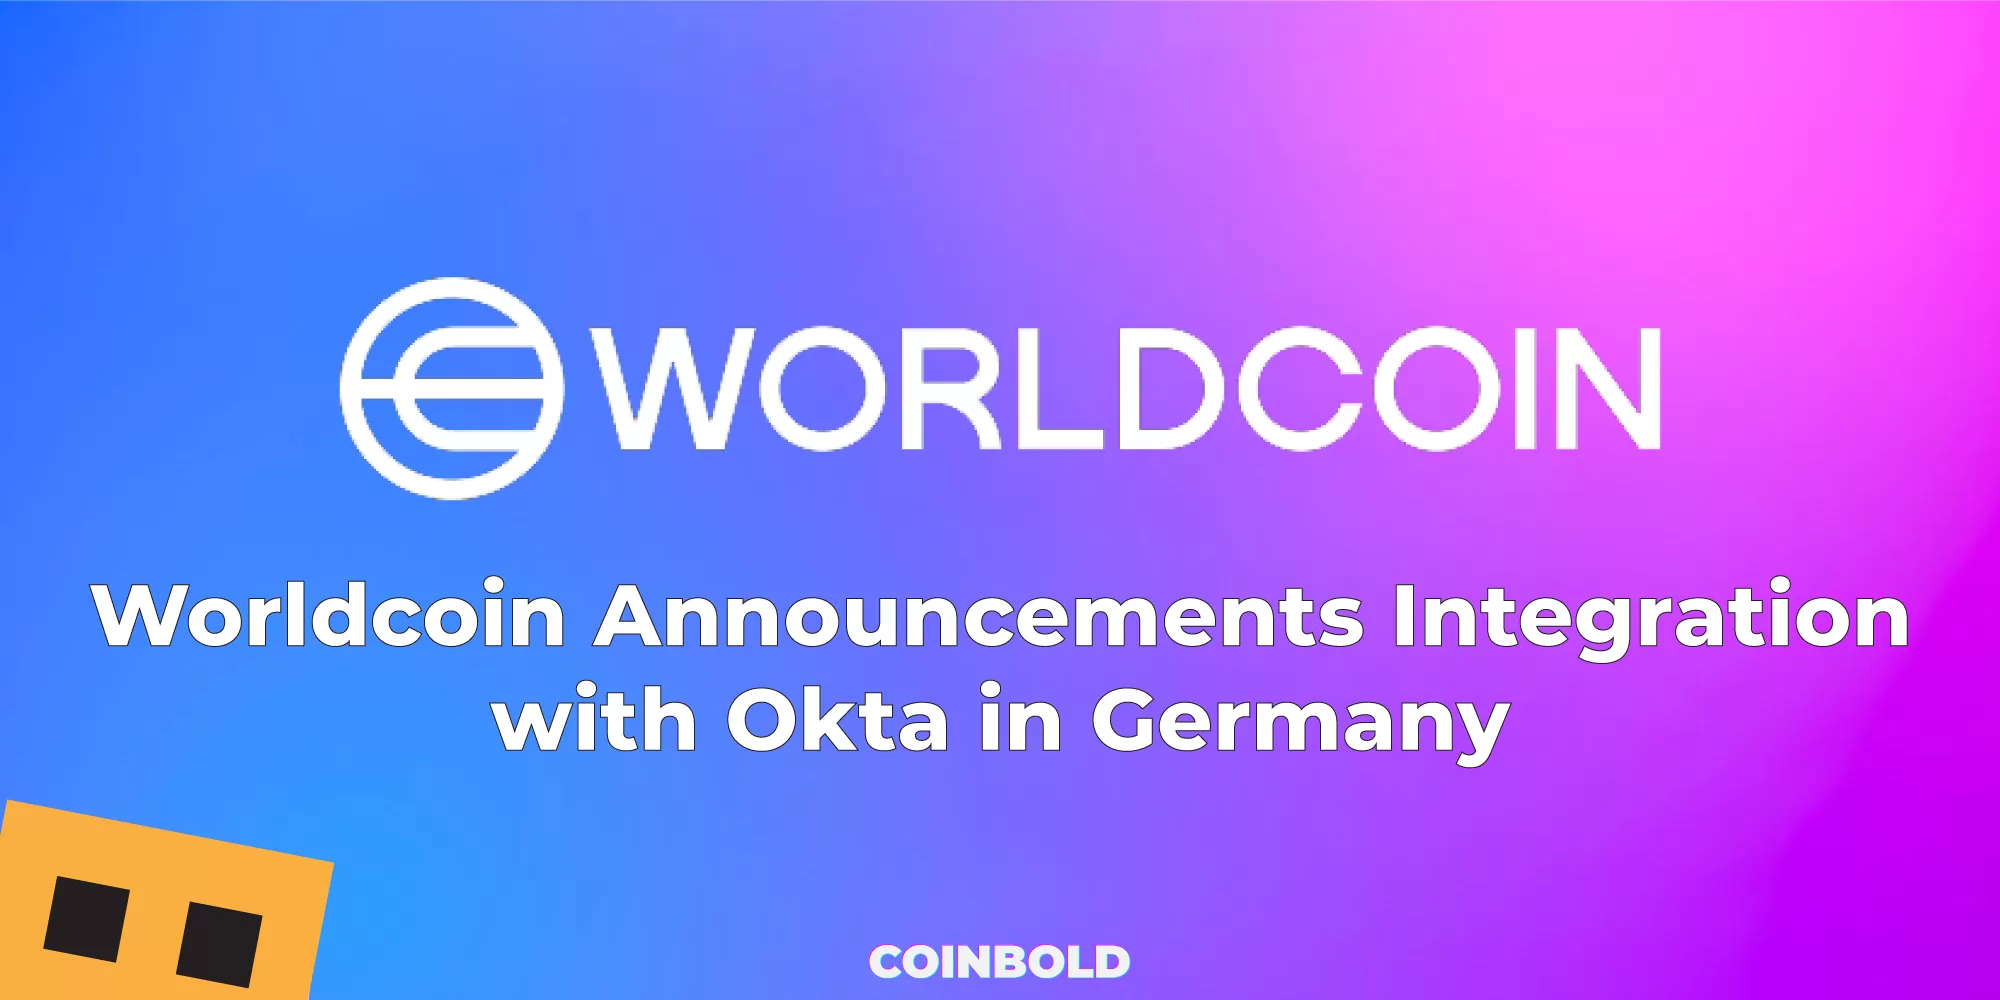 Worldcoin Announcements Integration with Okta in Germany